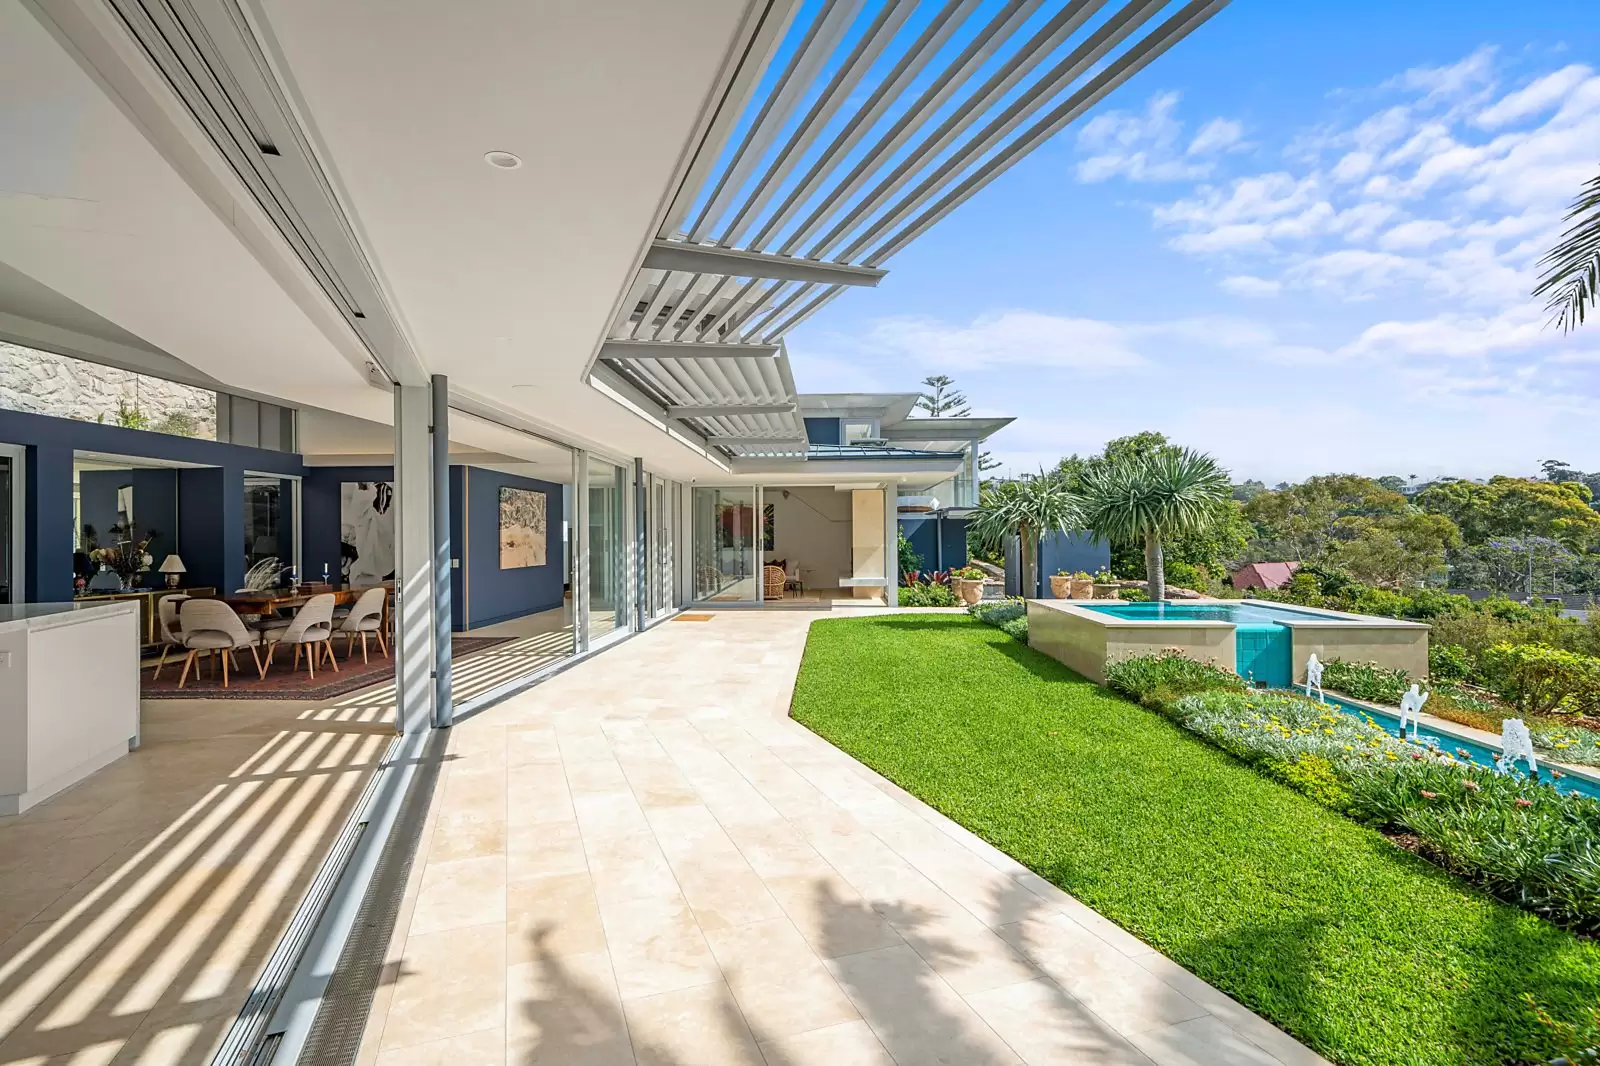 Photo #6: 97 Wentworth Road, Vaucluse - For Sale by Sydney Sotheby's International Realty